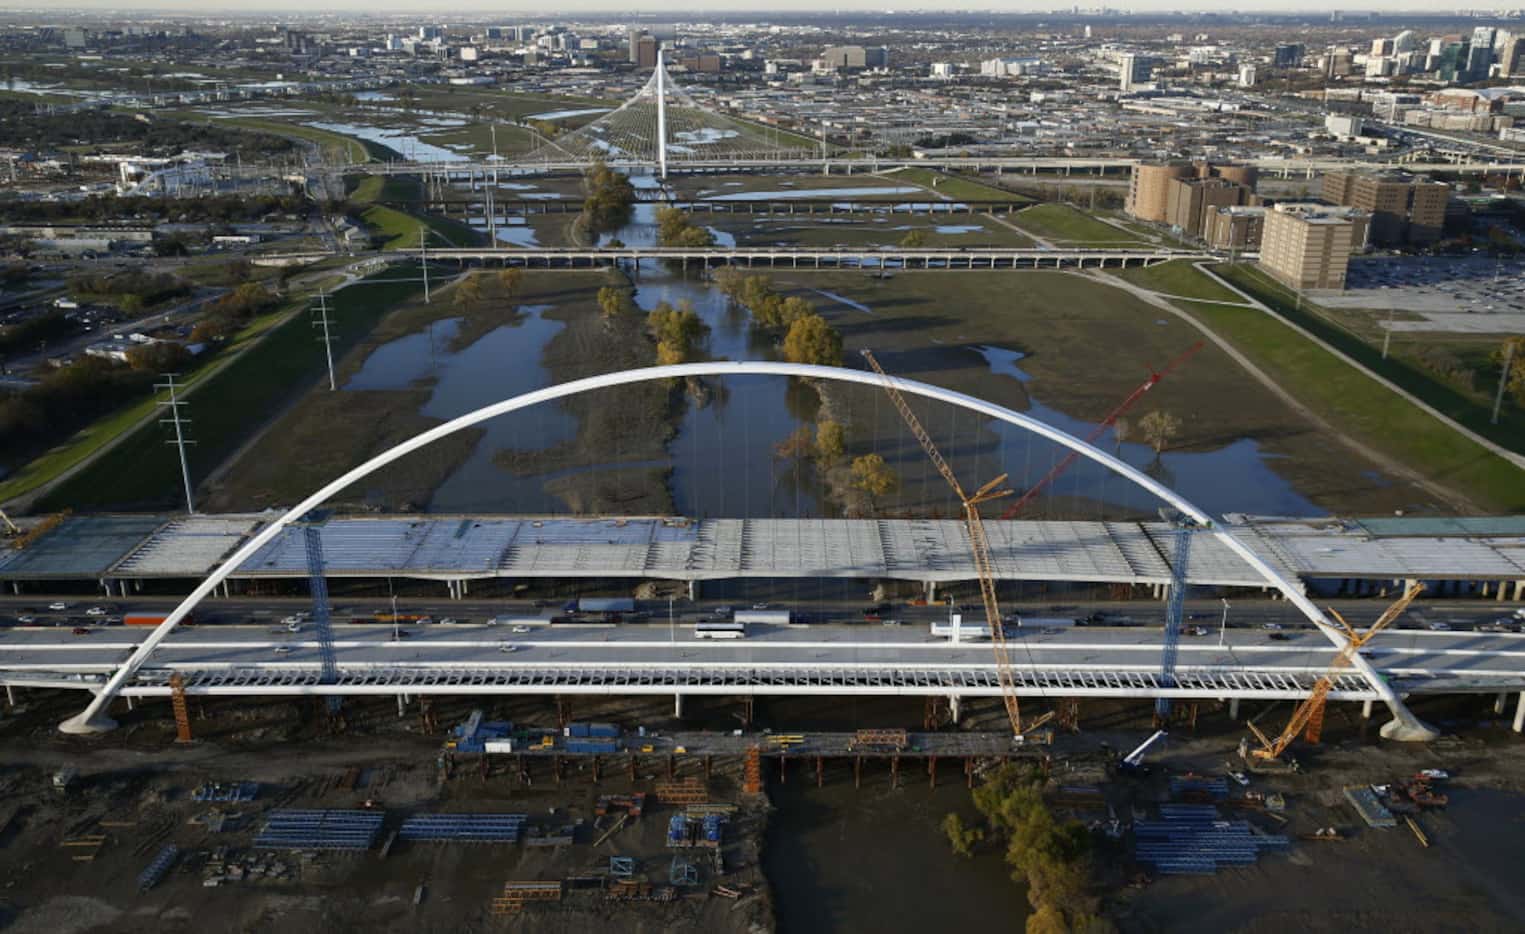 An aerial view looking north of the Margaret McDermott Bridge (foreground) and the Calatrava...